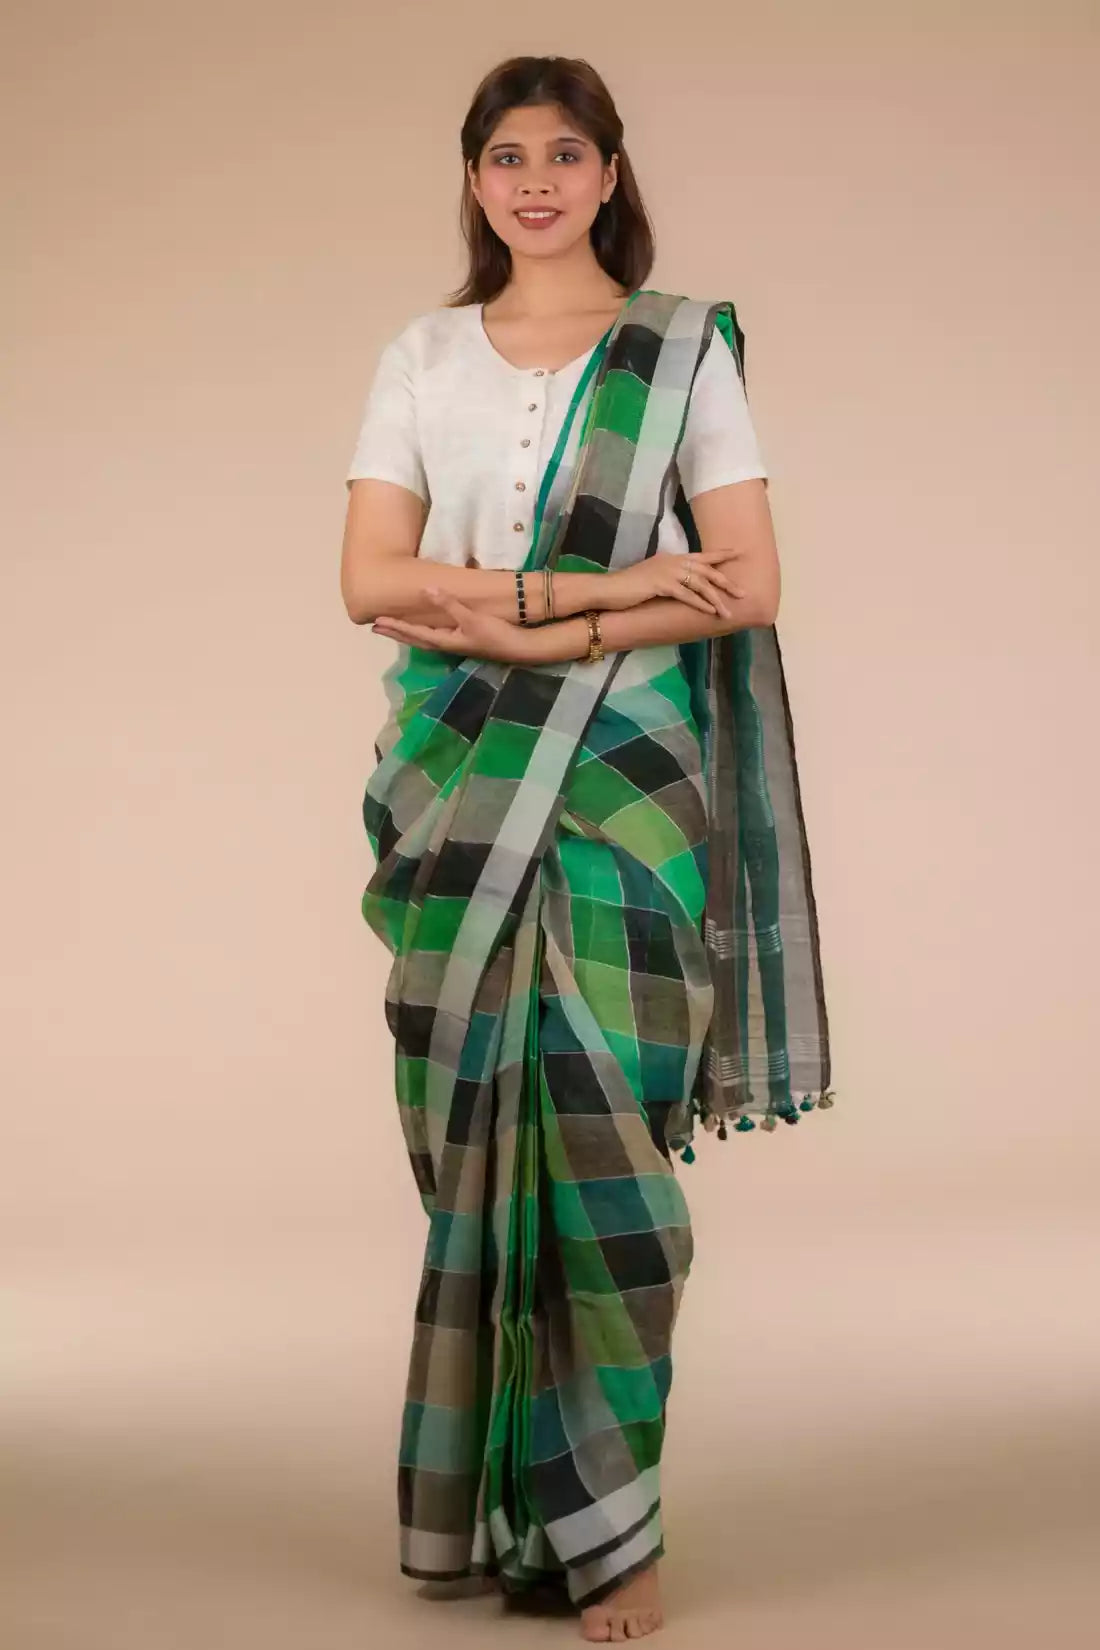 a beautiful woman with short hair wearing green checks saree with off-white blouse